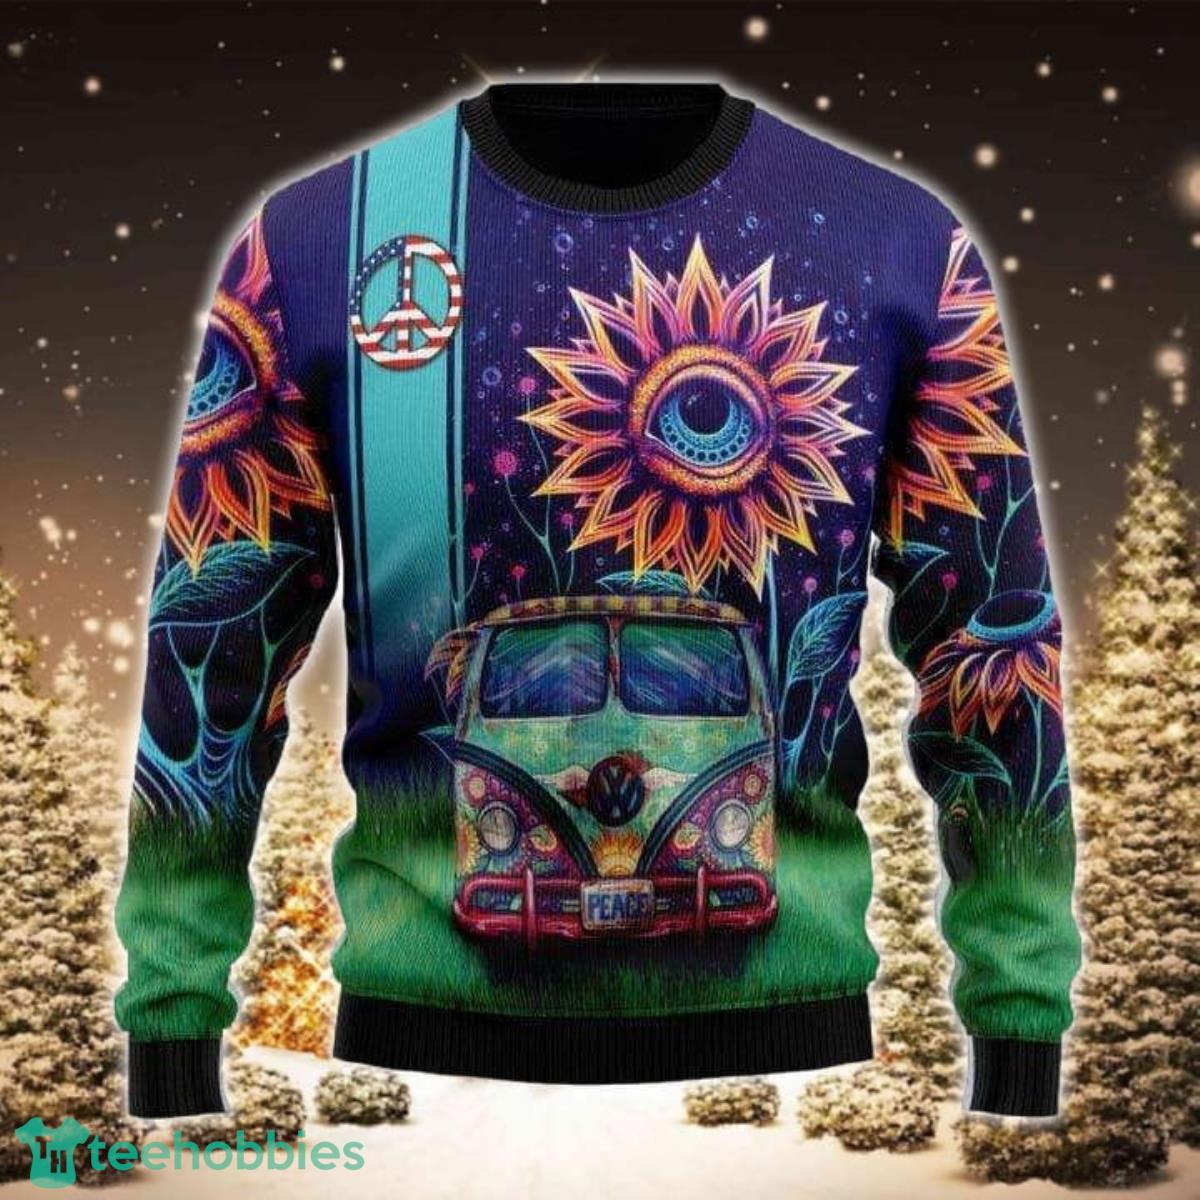 Amazing Hippie Van And Sunflower Eyes 3D Sweater Ugly Christmas Sweater For Men Women Product Photo 1